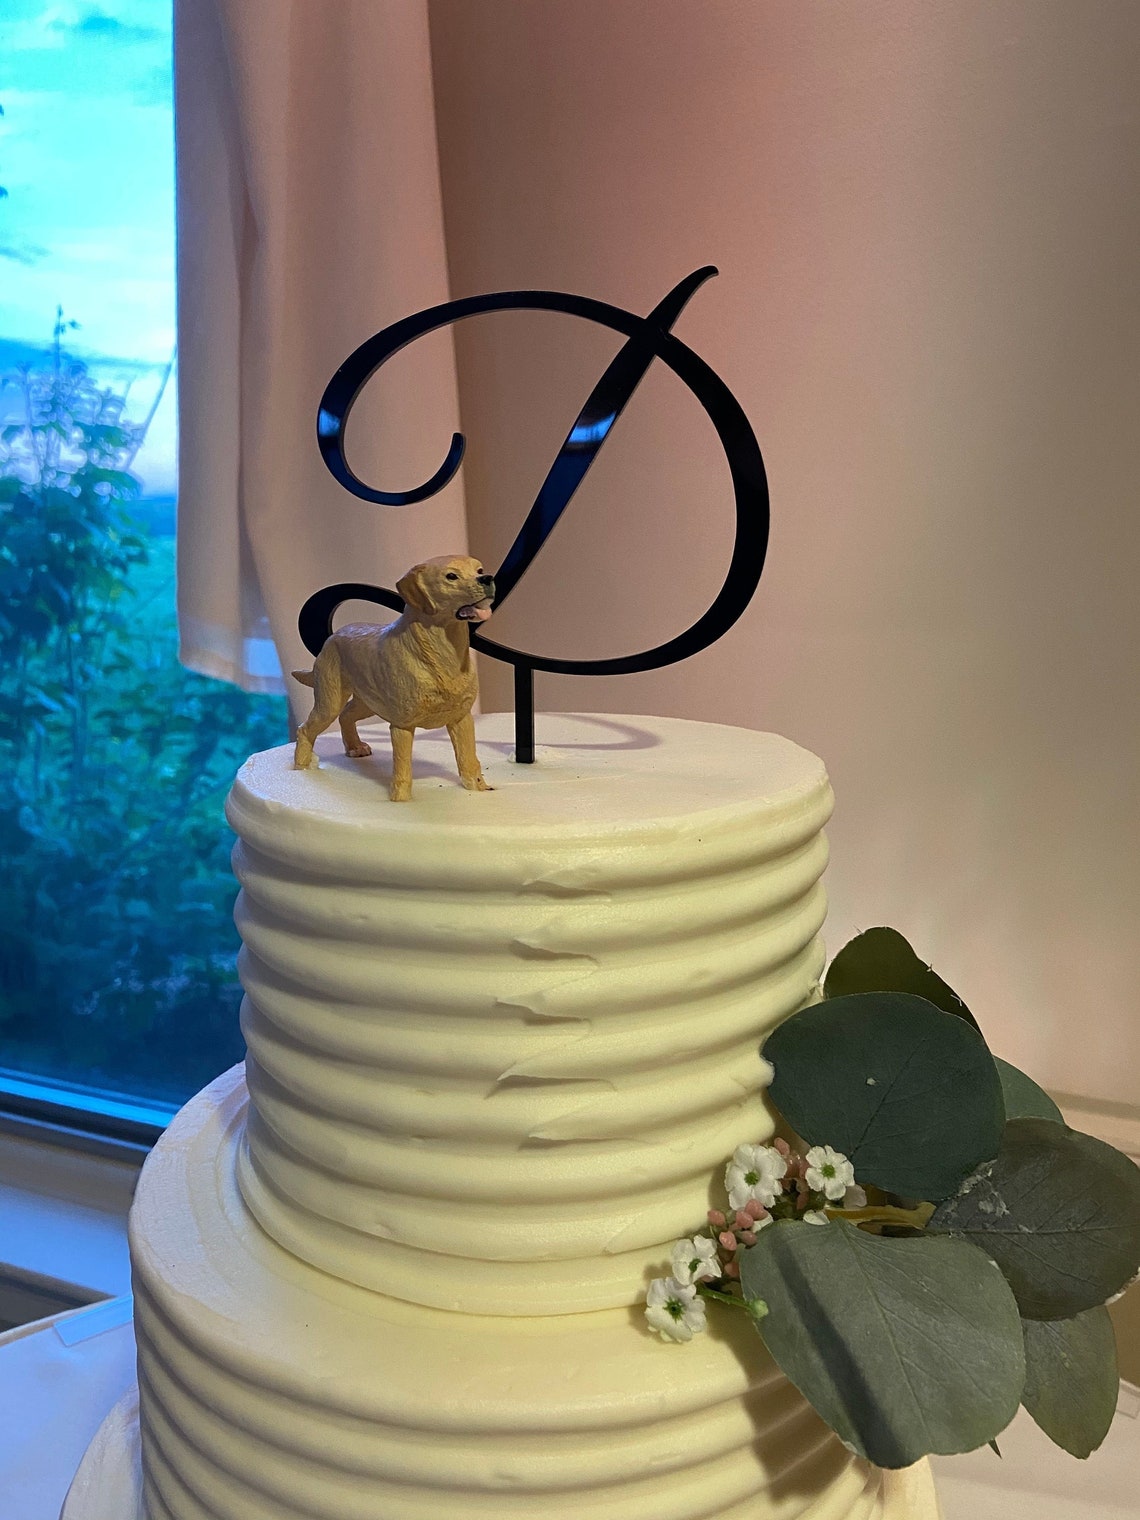 Wedding cake topper. Wooden or acrylic cake topper customized for any of your celebratory needs. Simplistic and elegant designs paired with multiple color schemes to top your celebratory baked goods. thequinnandcompany. www.thequinnandcompany.com